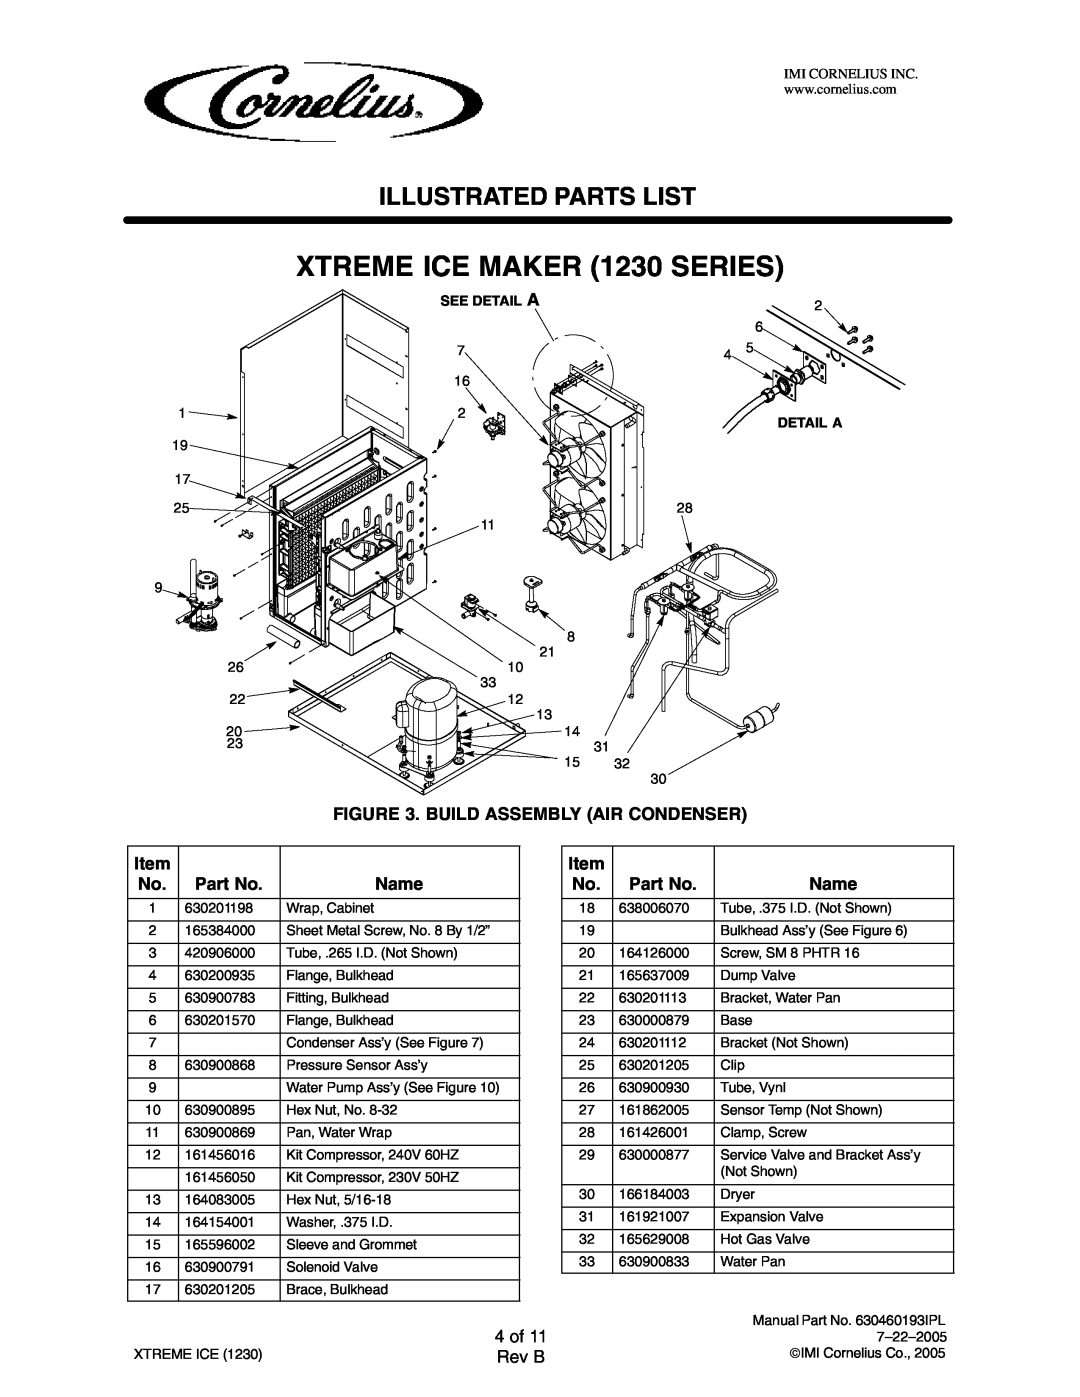 Cornelius 631812004, 631812040, 631812020 4 of, XTREME ICE MAKER 1230 SERIES, Illustrated Parts List, Rev B, See Detail A 